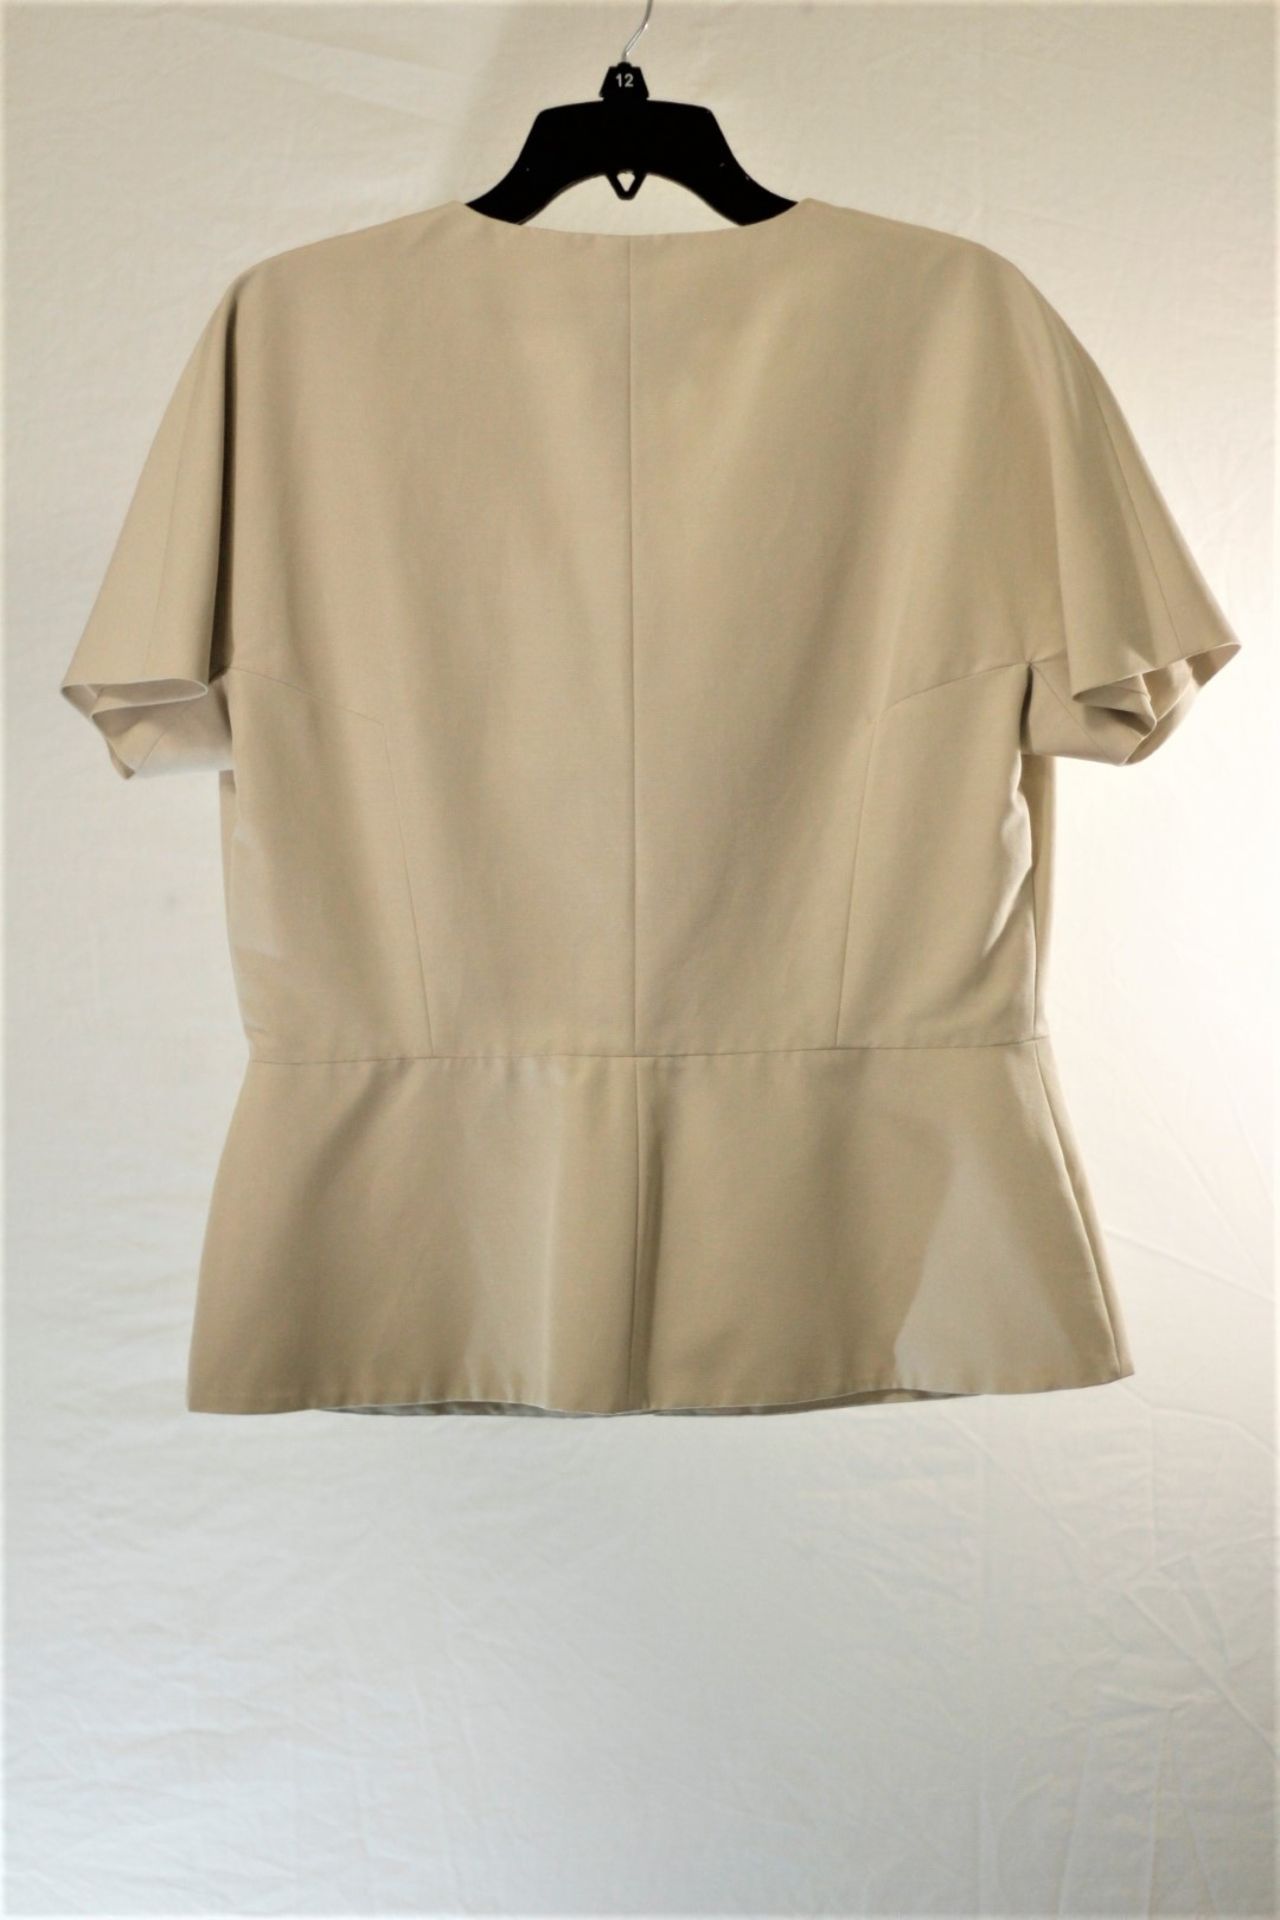 1 x Agnona Champagne Top - Size: 18 - Material: 69% Cotton, 31% Silk. Lining 100% Cotton - From a - Image 2 of 10